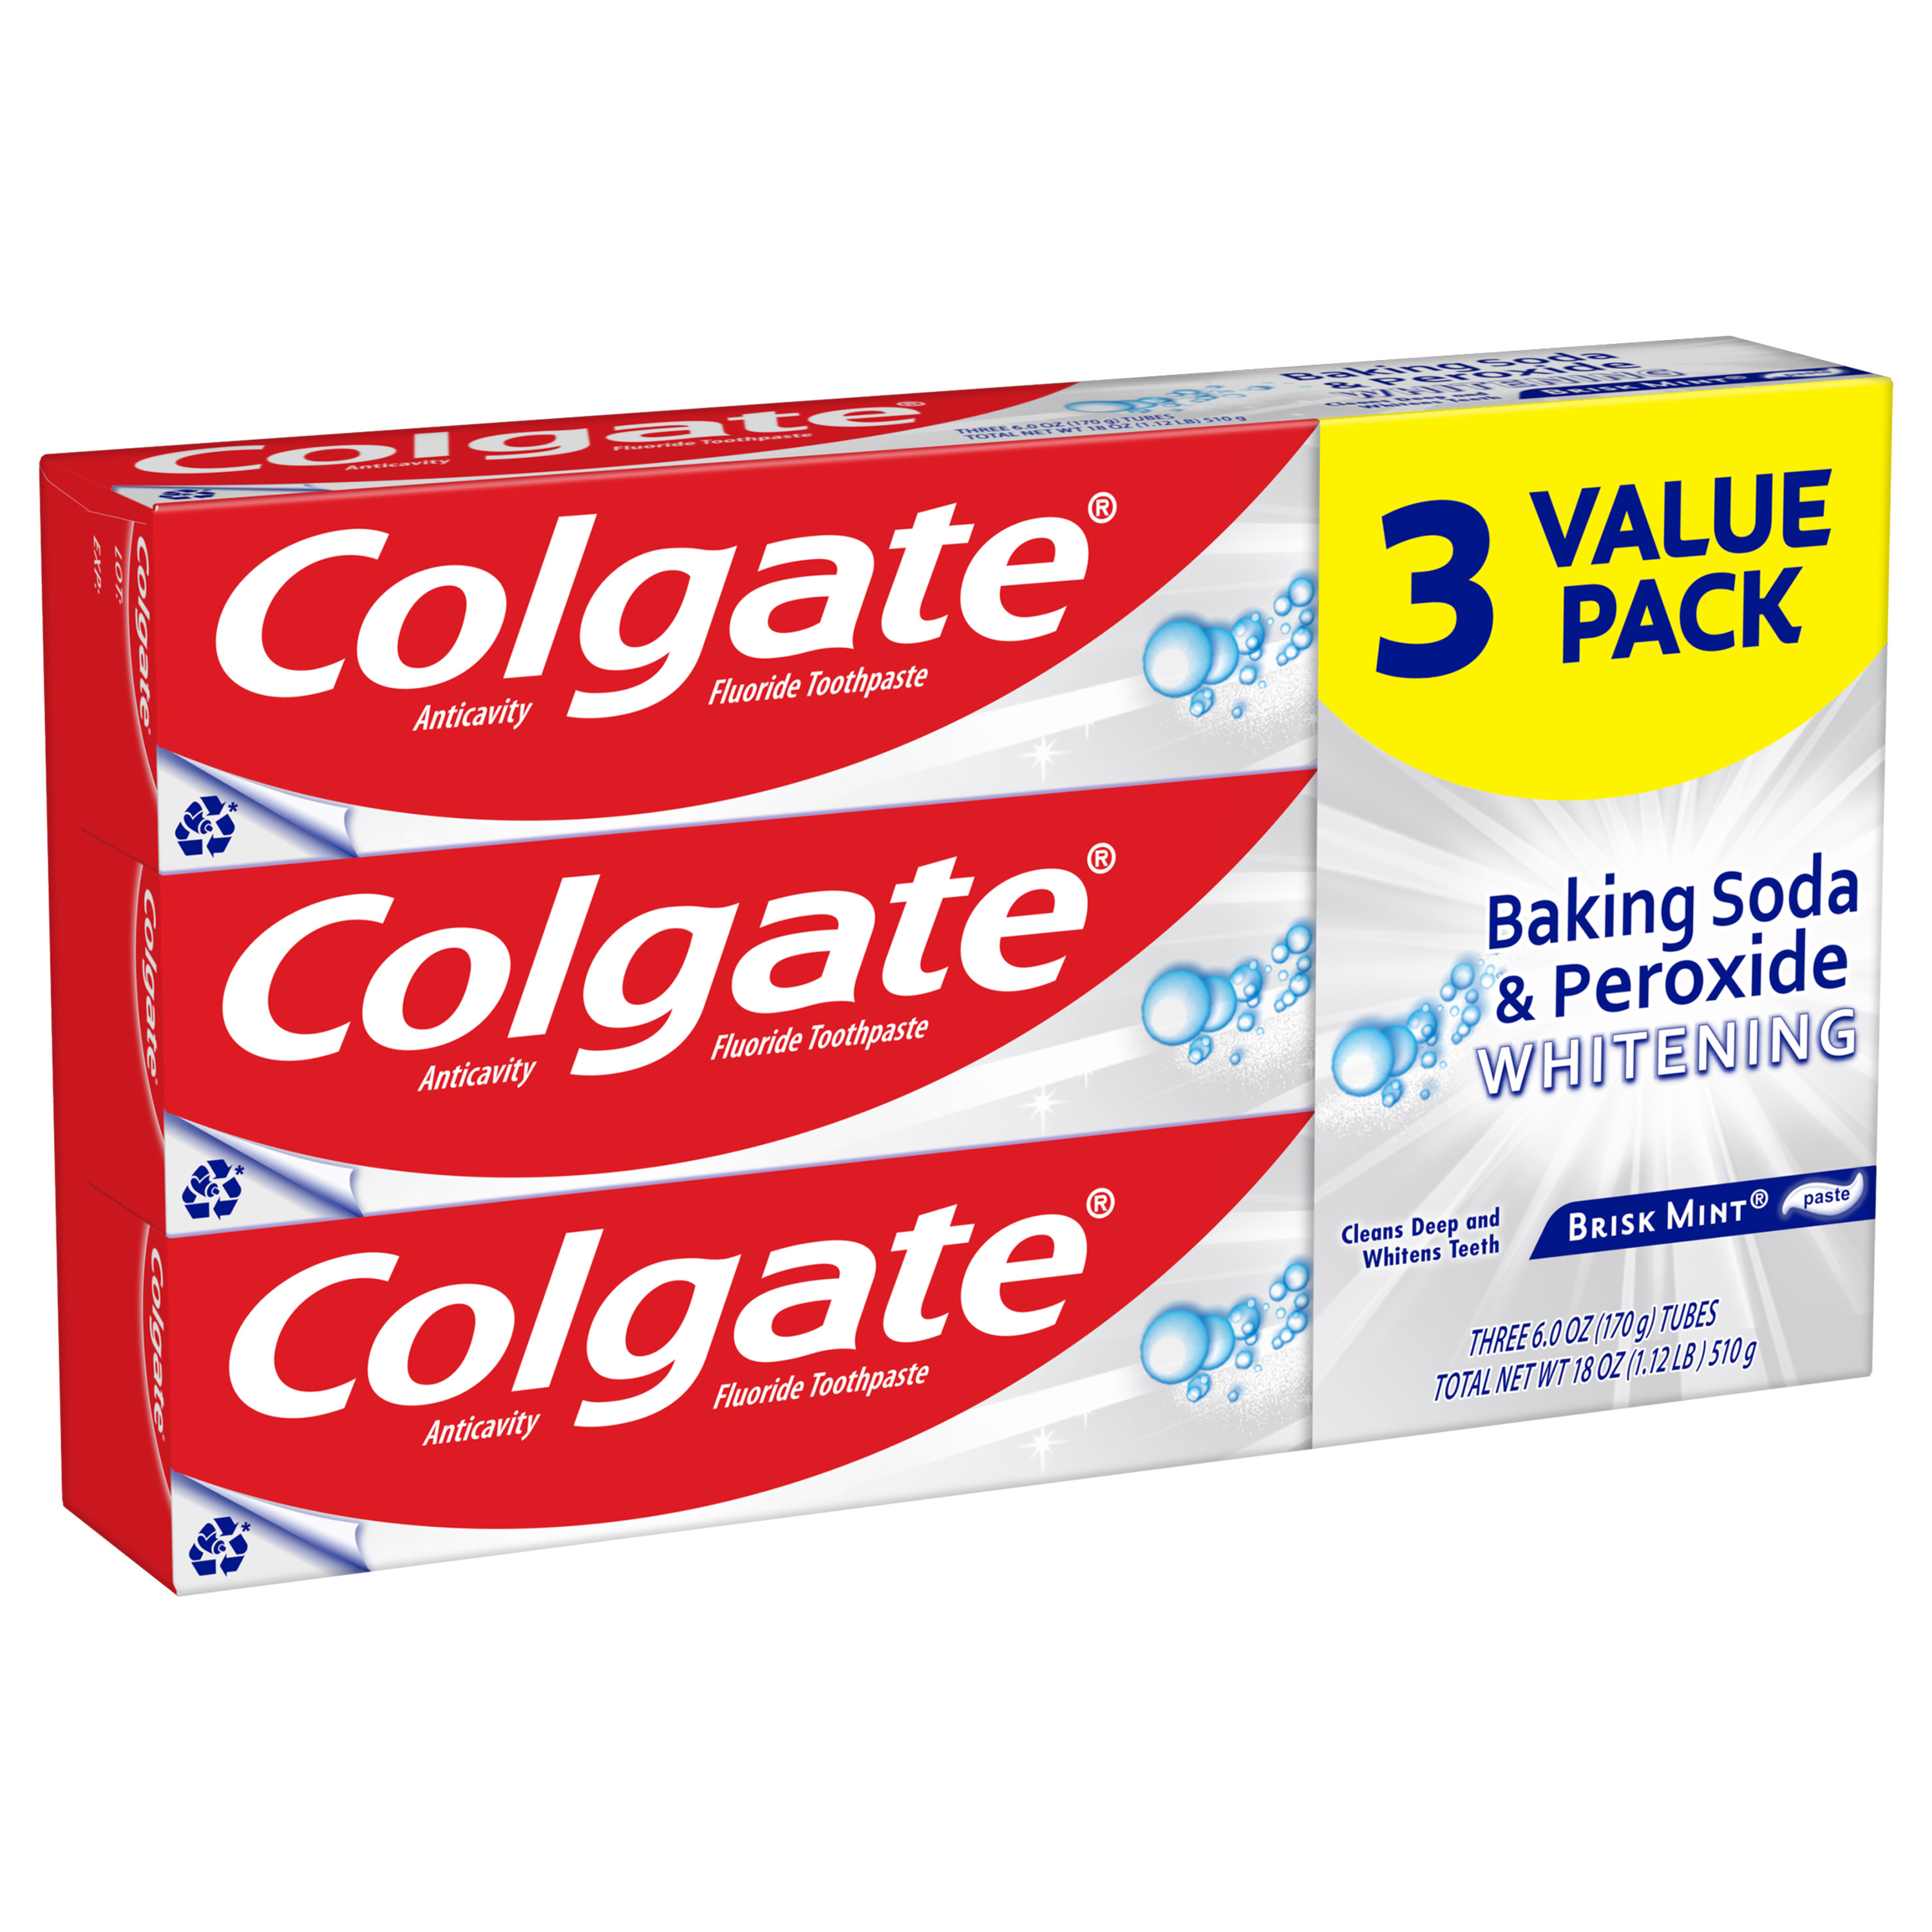 Colgate Baking Soda and Peroxide Whitening Toothpaste, Brisk Mint, 3 Pack - image 3 of 5